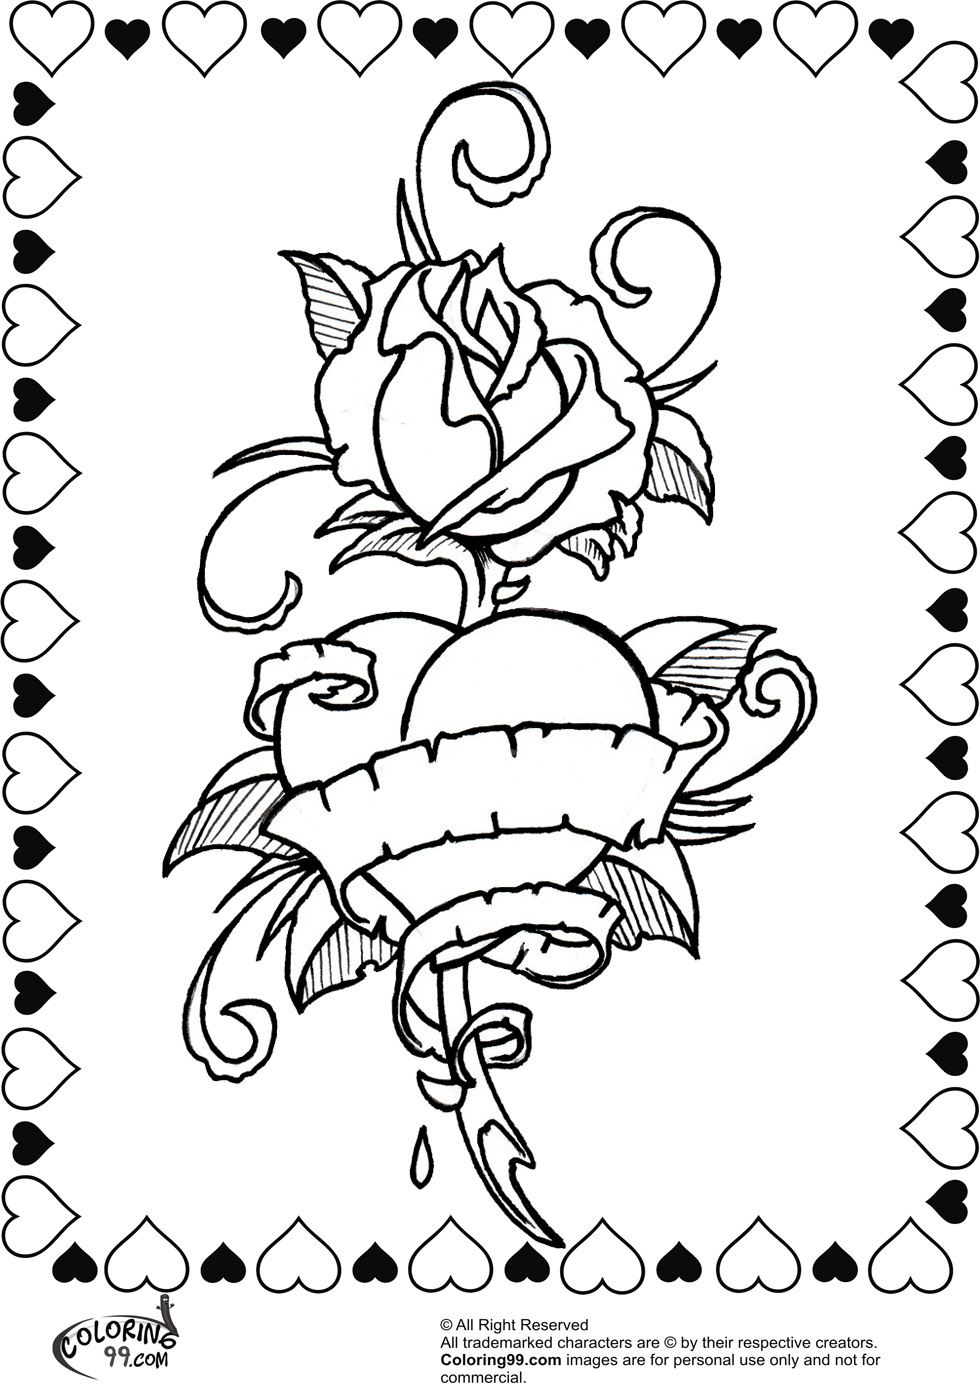 Roses Coloring Pages - GetColoringPages.com